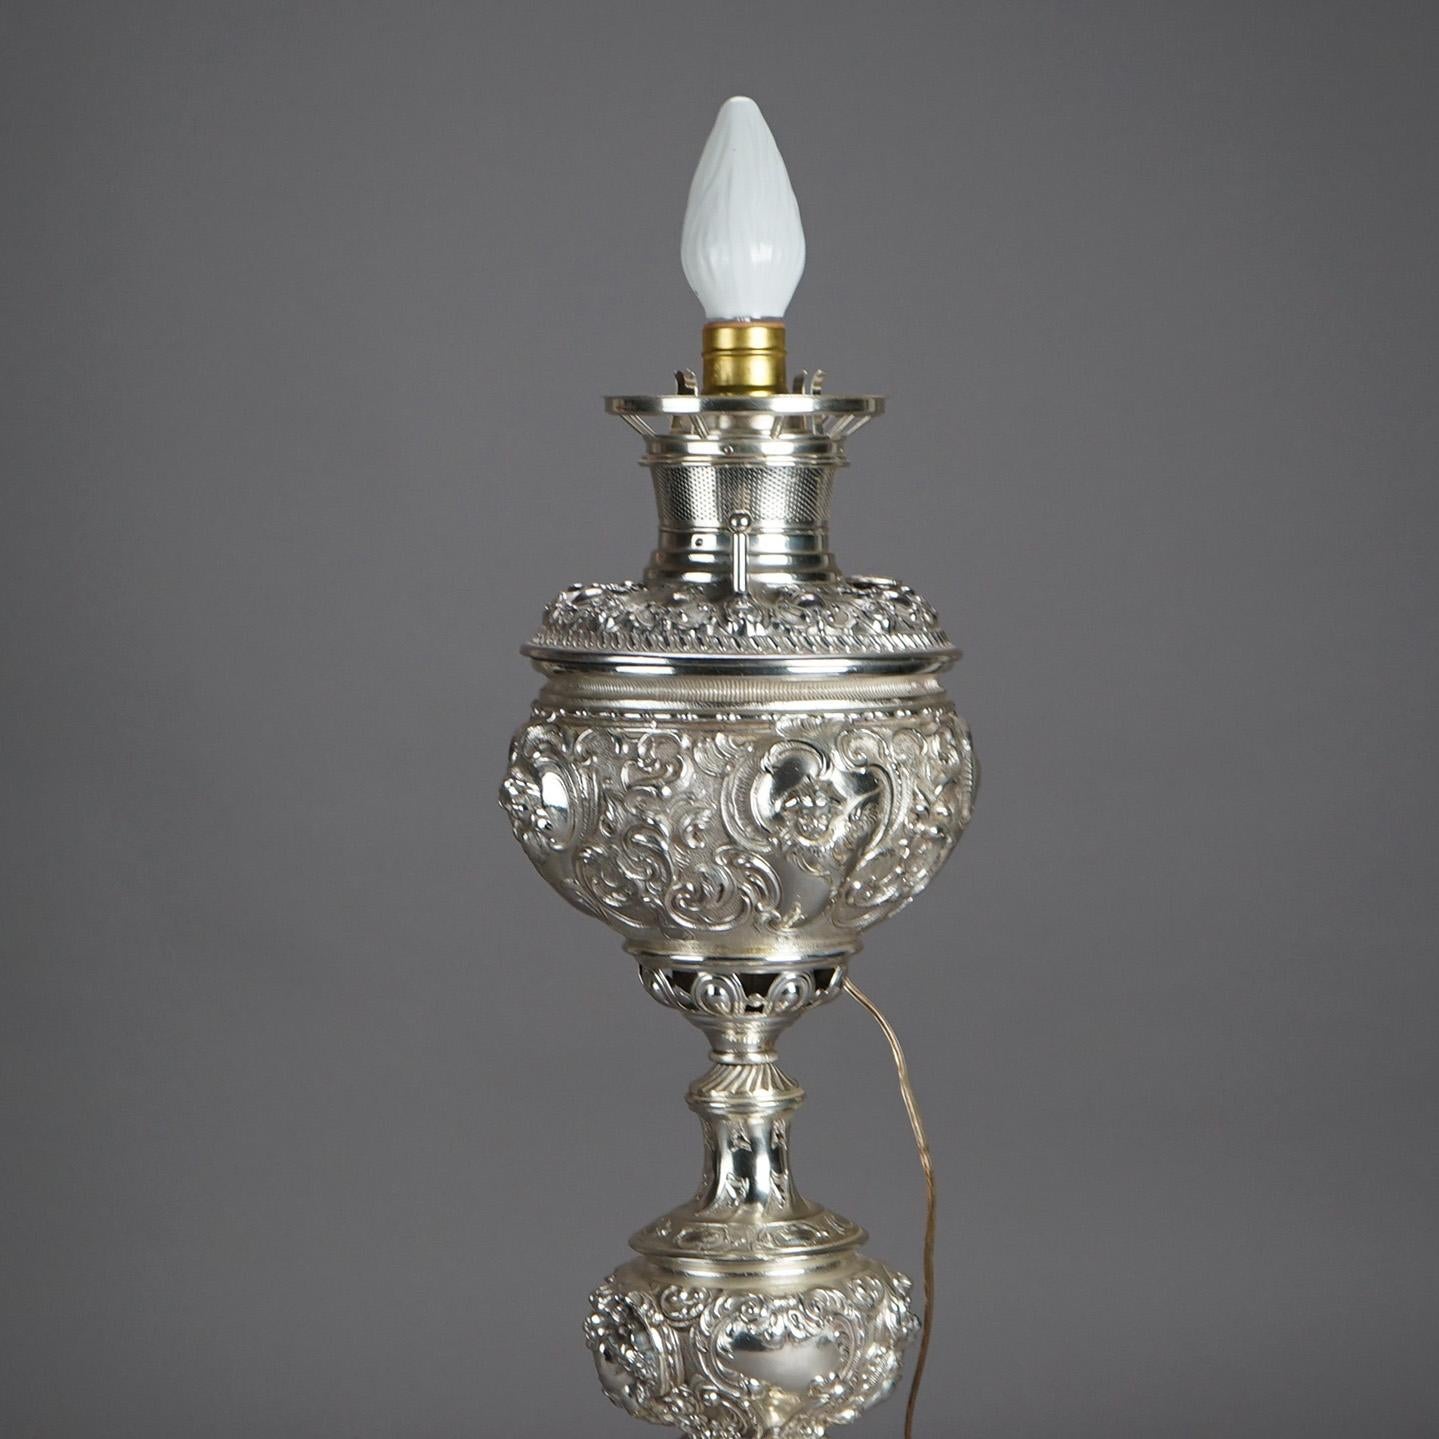 Antique Rococo Figural Silver Plate Parlor Lamp With Winged Cherubs c1890 For Sale 6